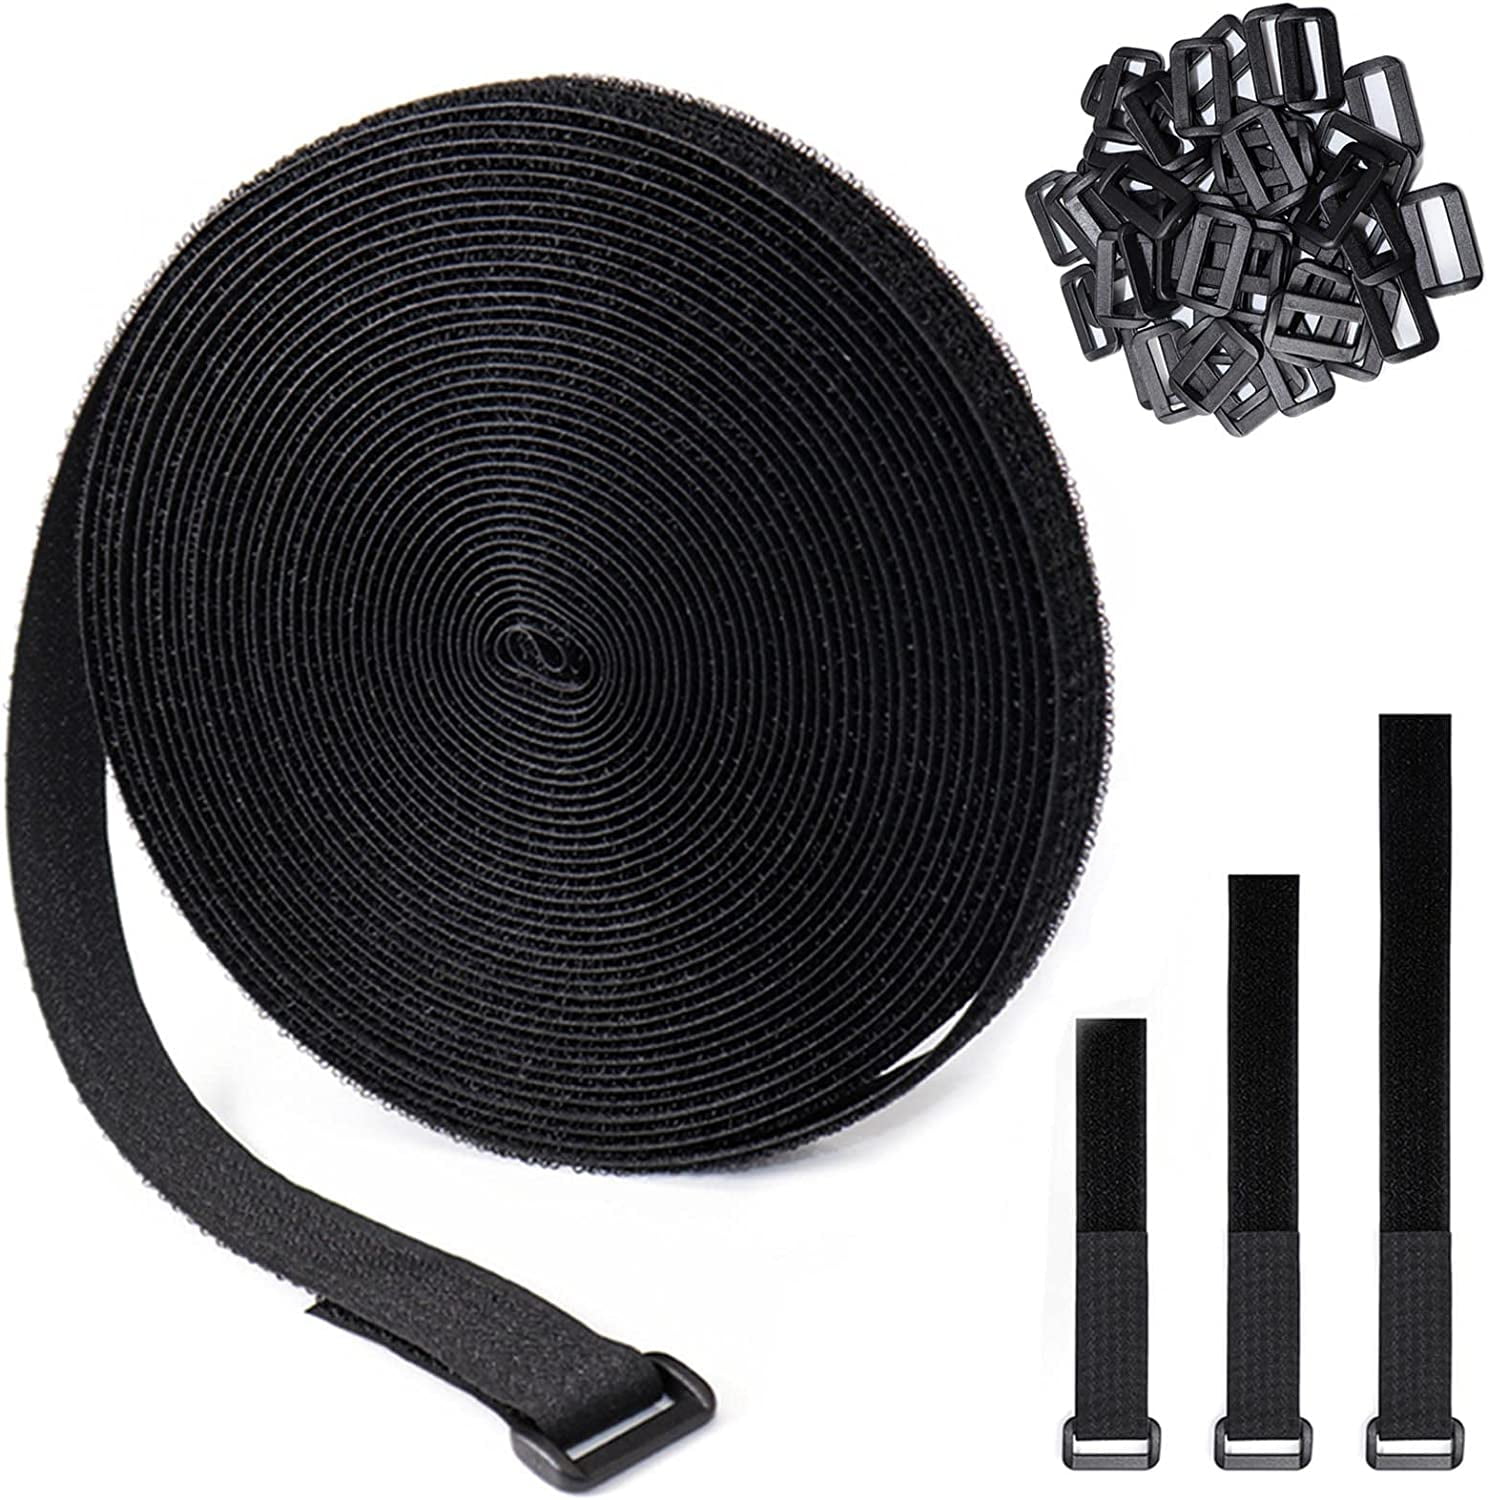 30 m Velcro Strap with 150 Buckles, Velcro Fastening Band, Wide Cable ...